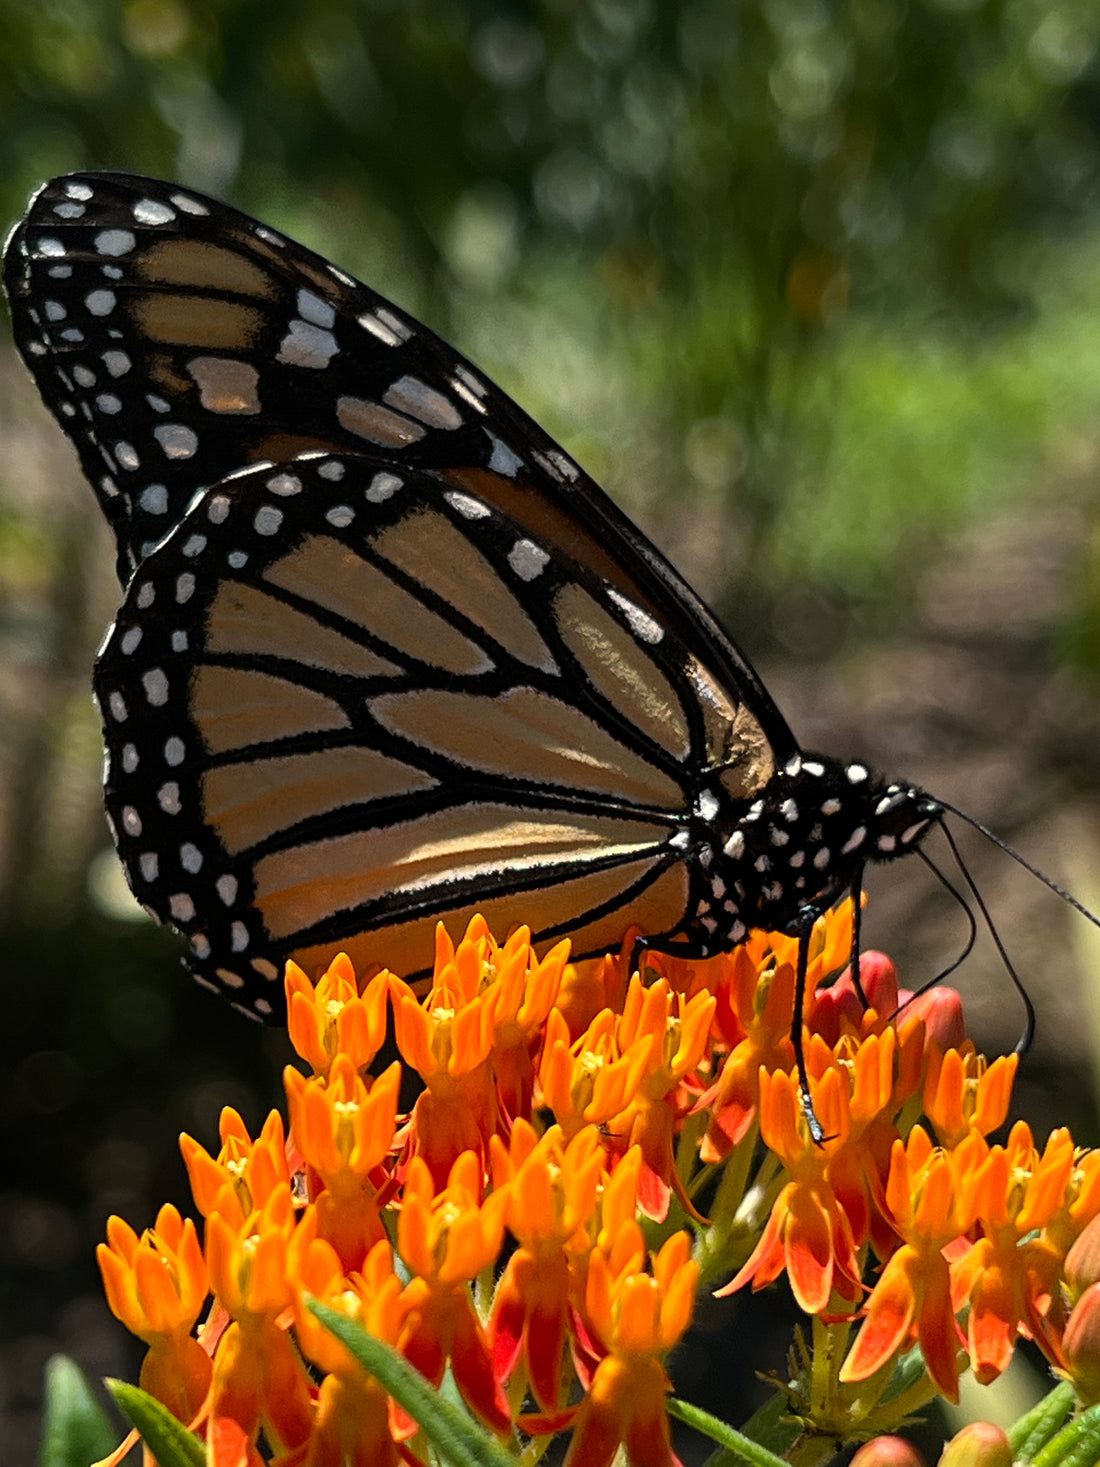 The Disappearing Act: Monarchs and Their Prairies